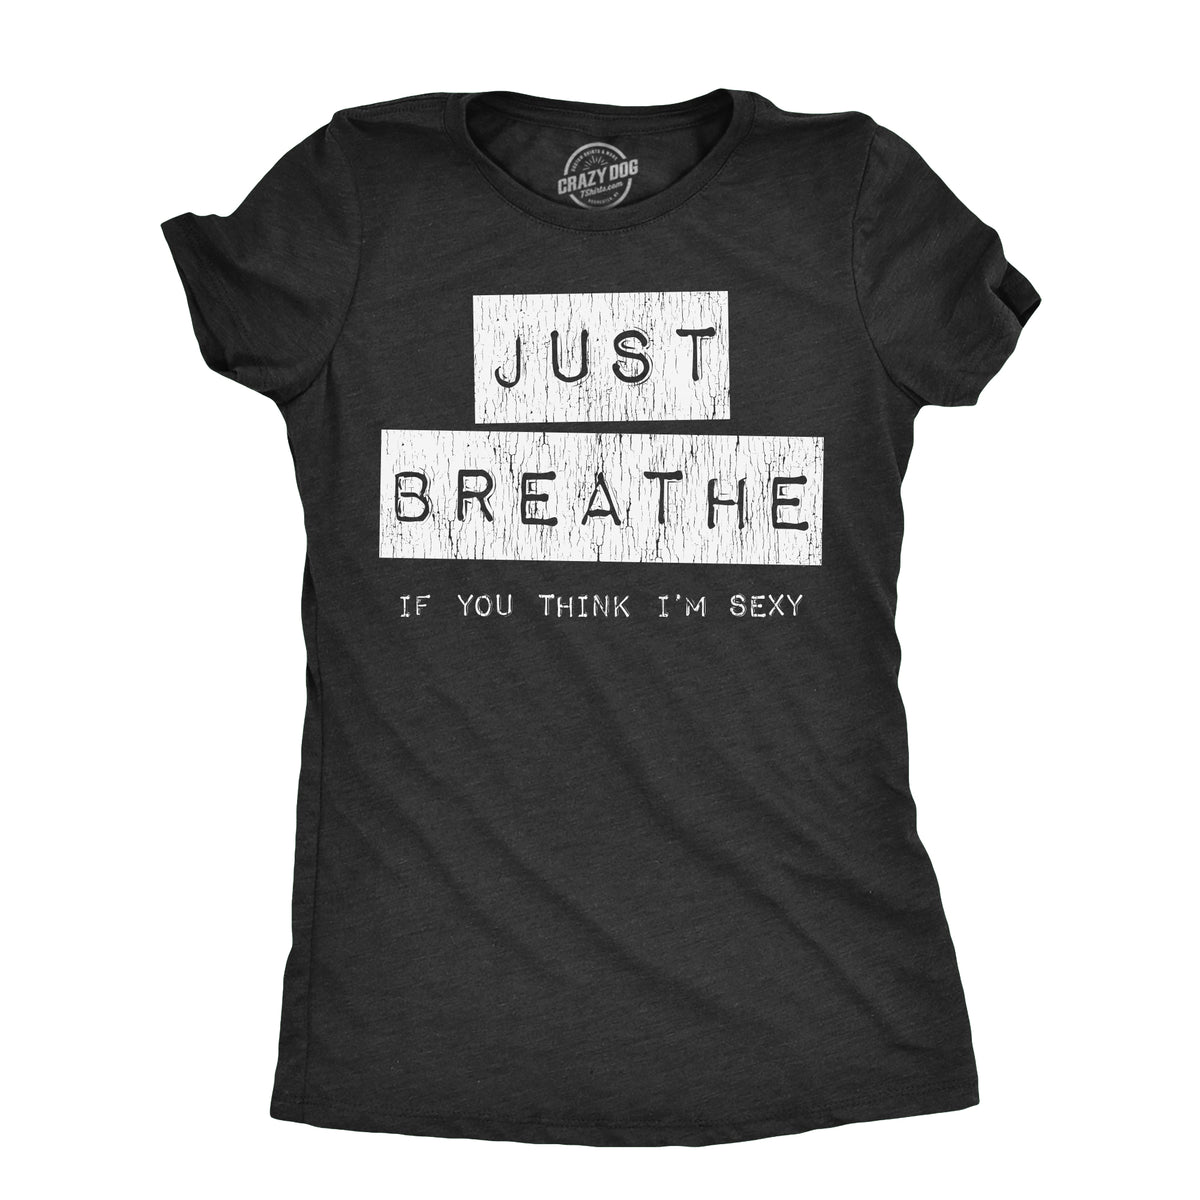 Funny Heather Black - BREATHE Just Breathe If You Think Im Sexy Womens T Shirt Nerdy sarcastic Tee